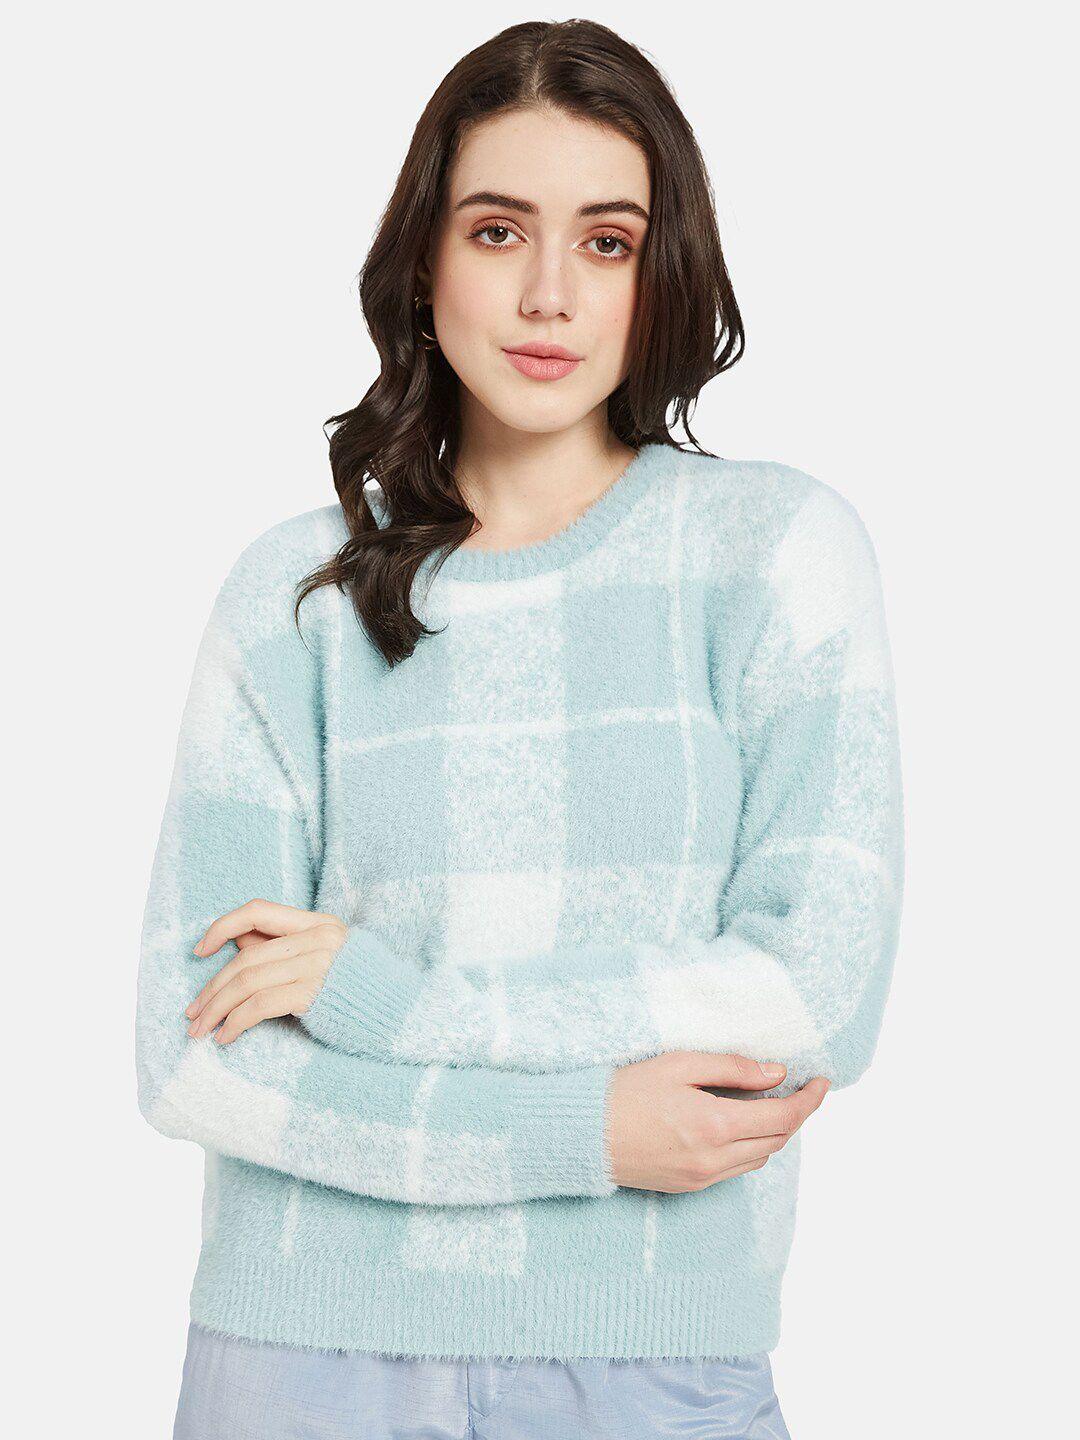 mettle checked round neck pullover sweater